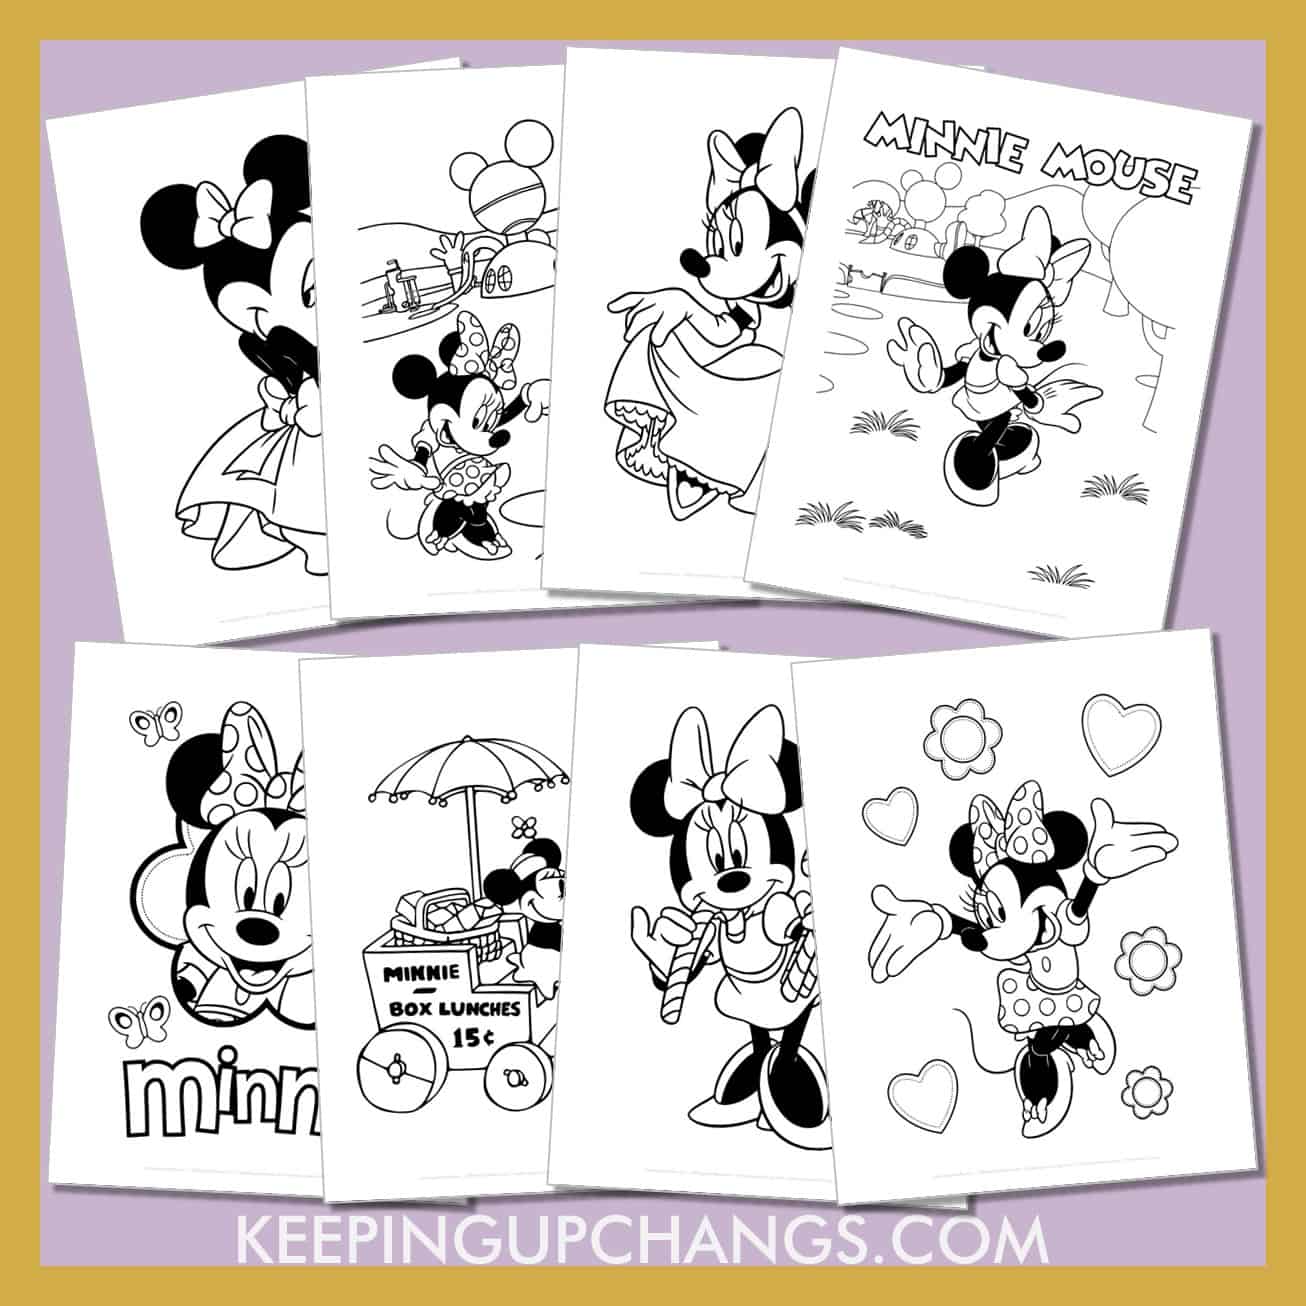 free minnie mouse pictures to color for toddlers, kids, adults.